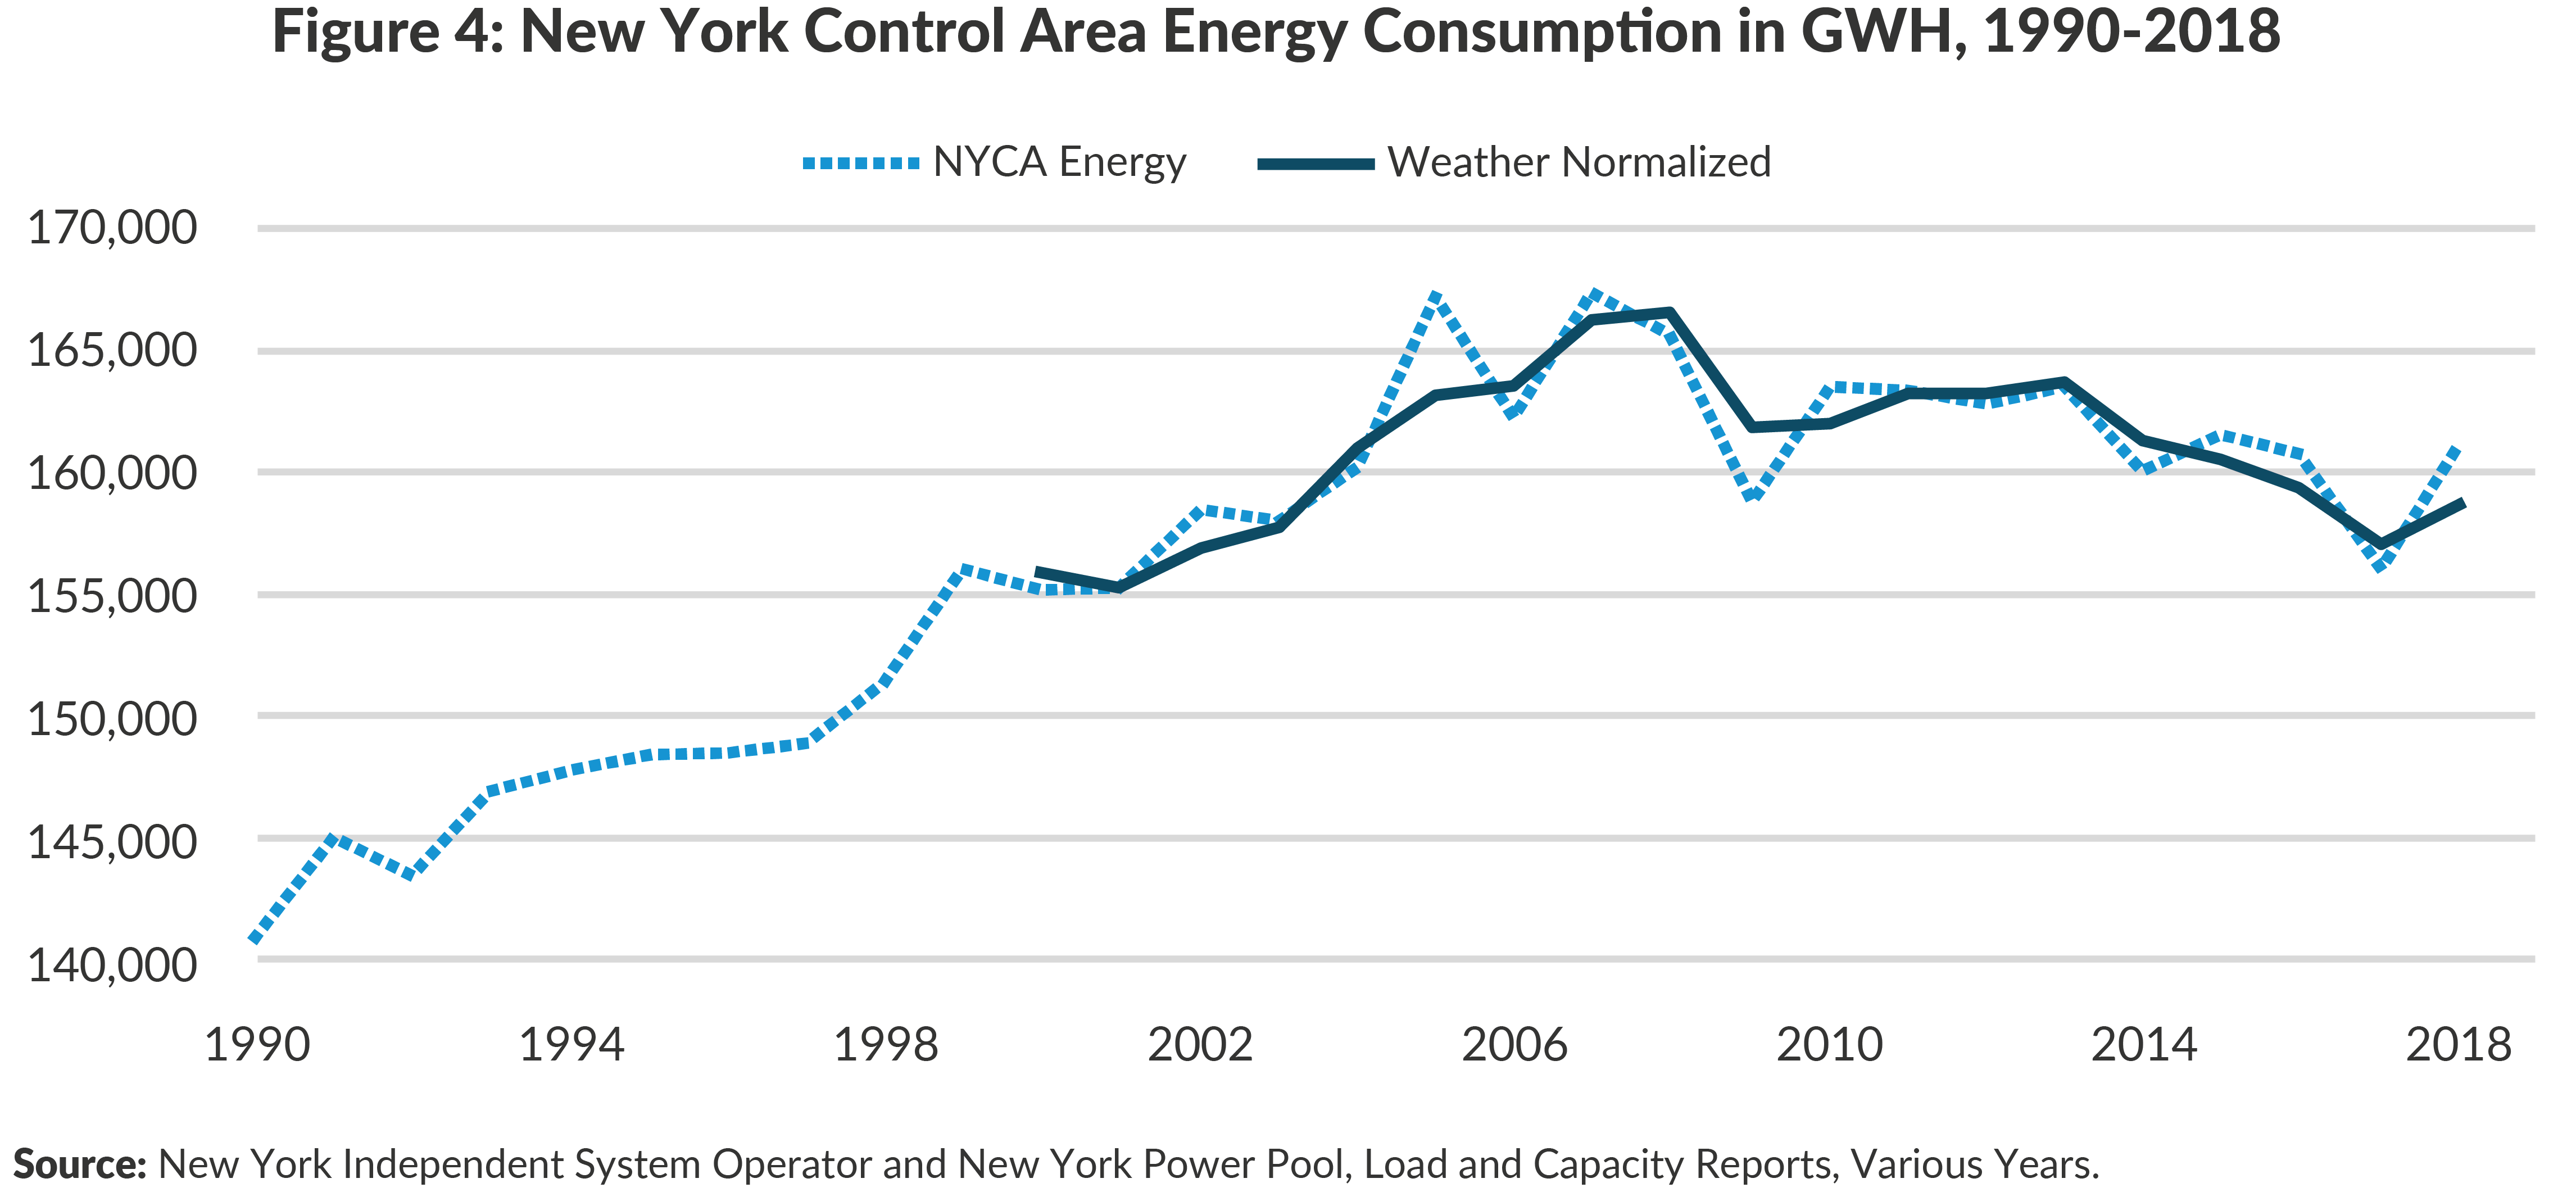 Figure 4: New York Control Area Energy Consumption in GWH, 1990-2018